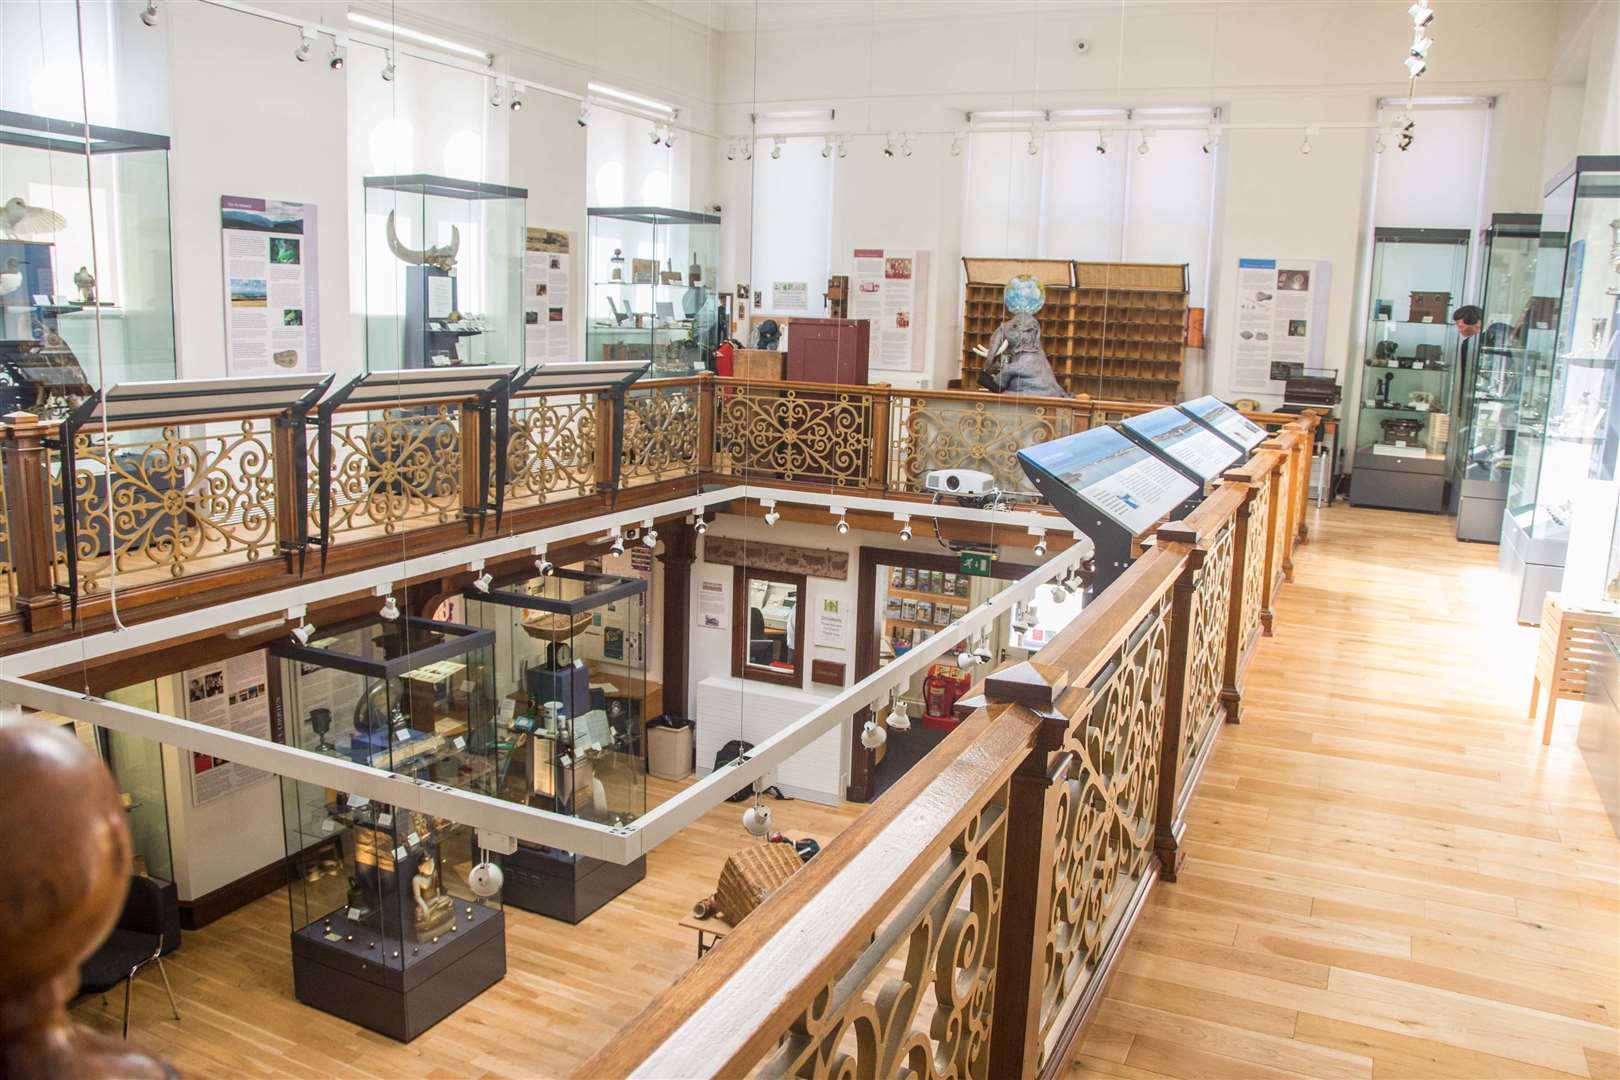 Upstairs displays in the Falconer Museum, summer 2019.